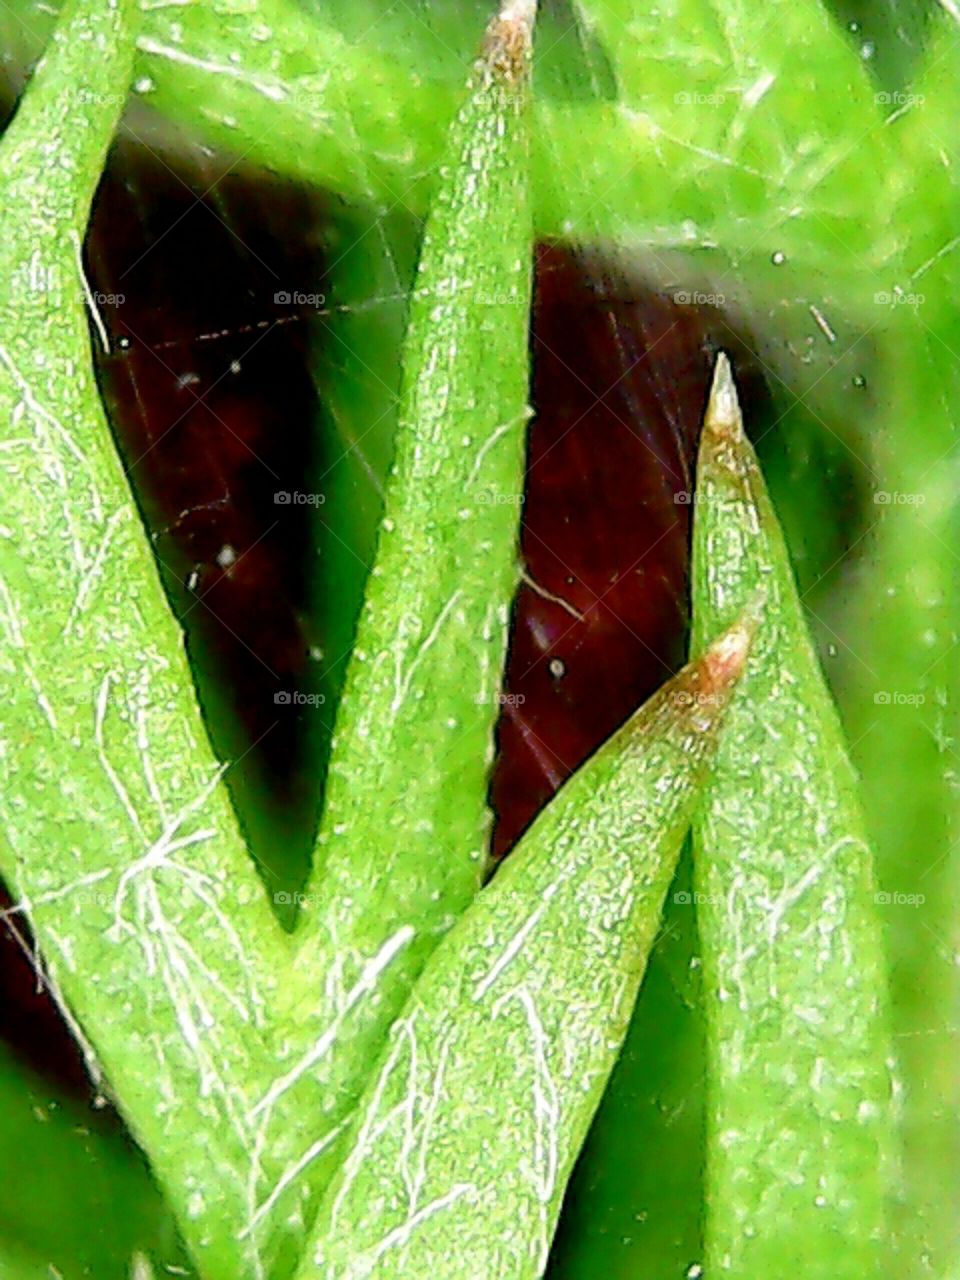 A small view of a greeny one.